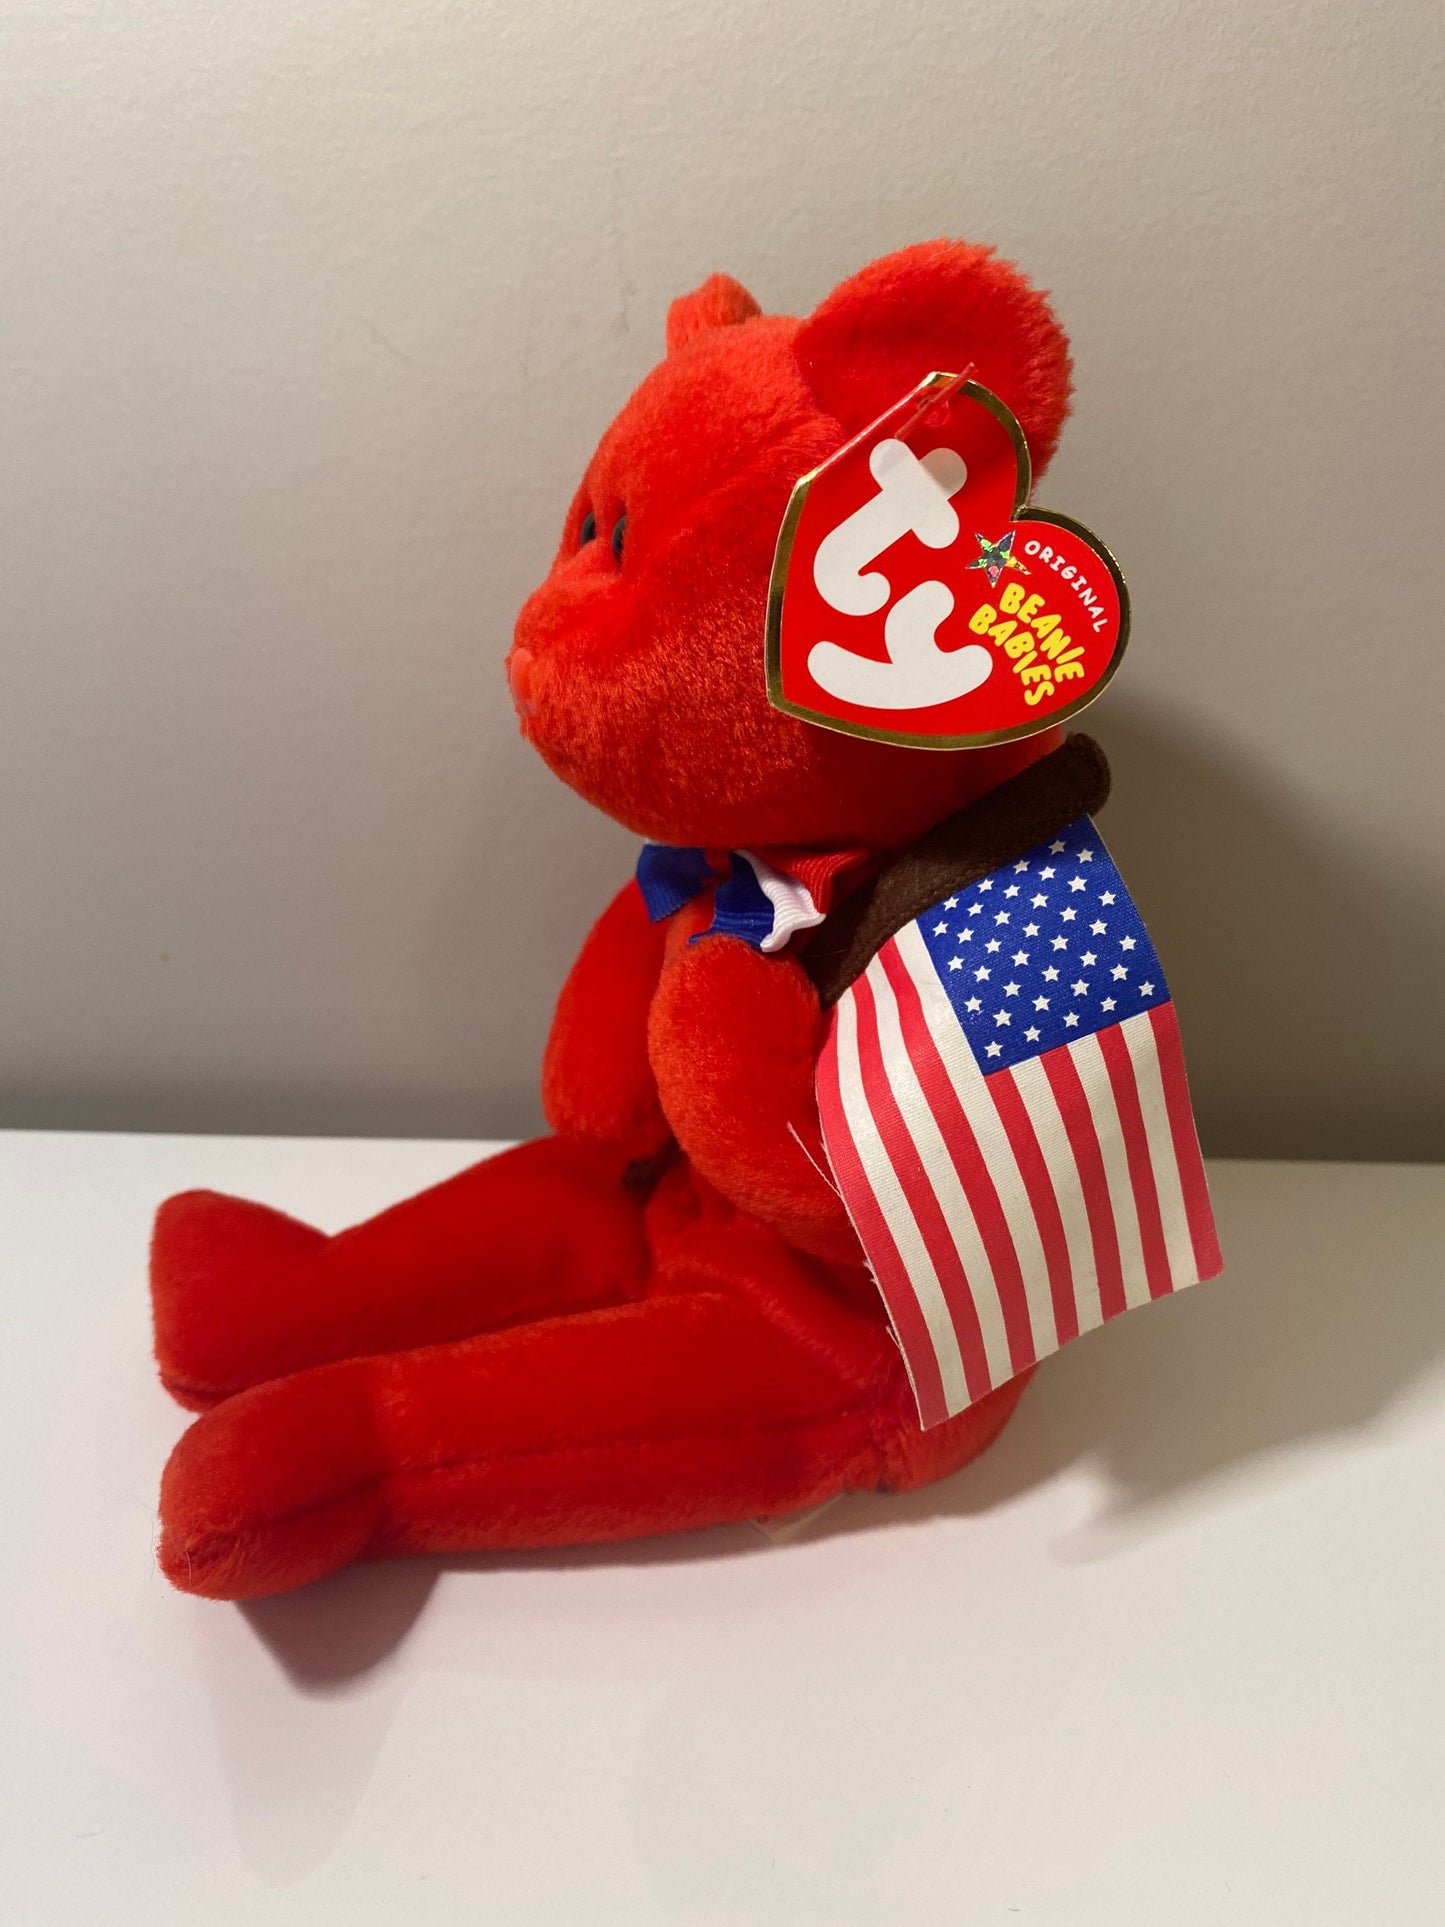 Ty Beanie Baby “Thomas” the Red USA Bear Plush Holding American Flag (8.5 inch)